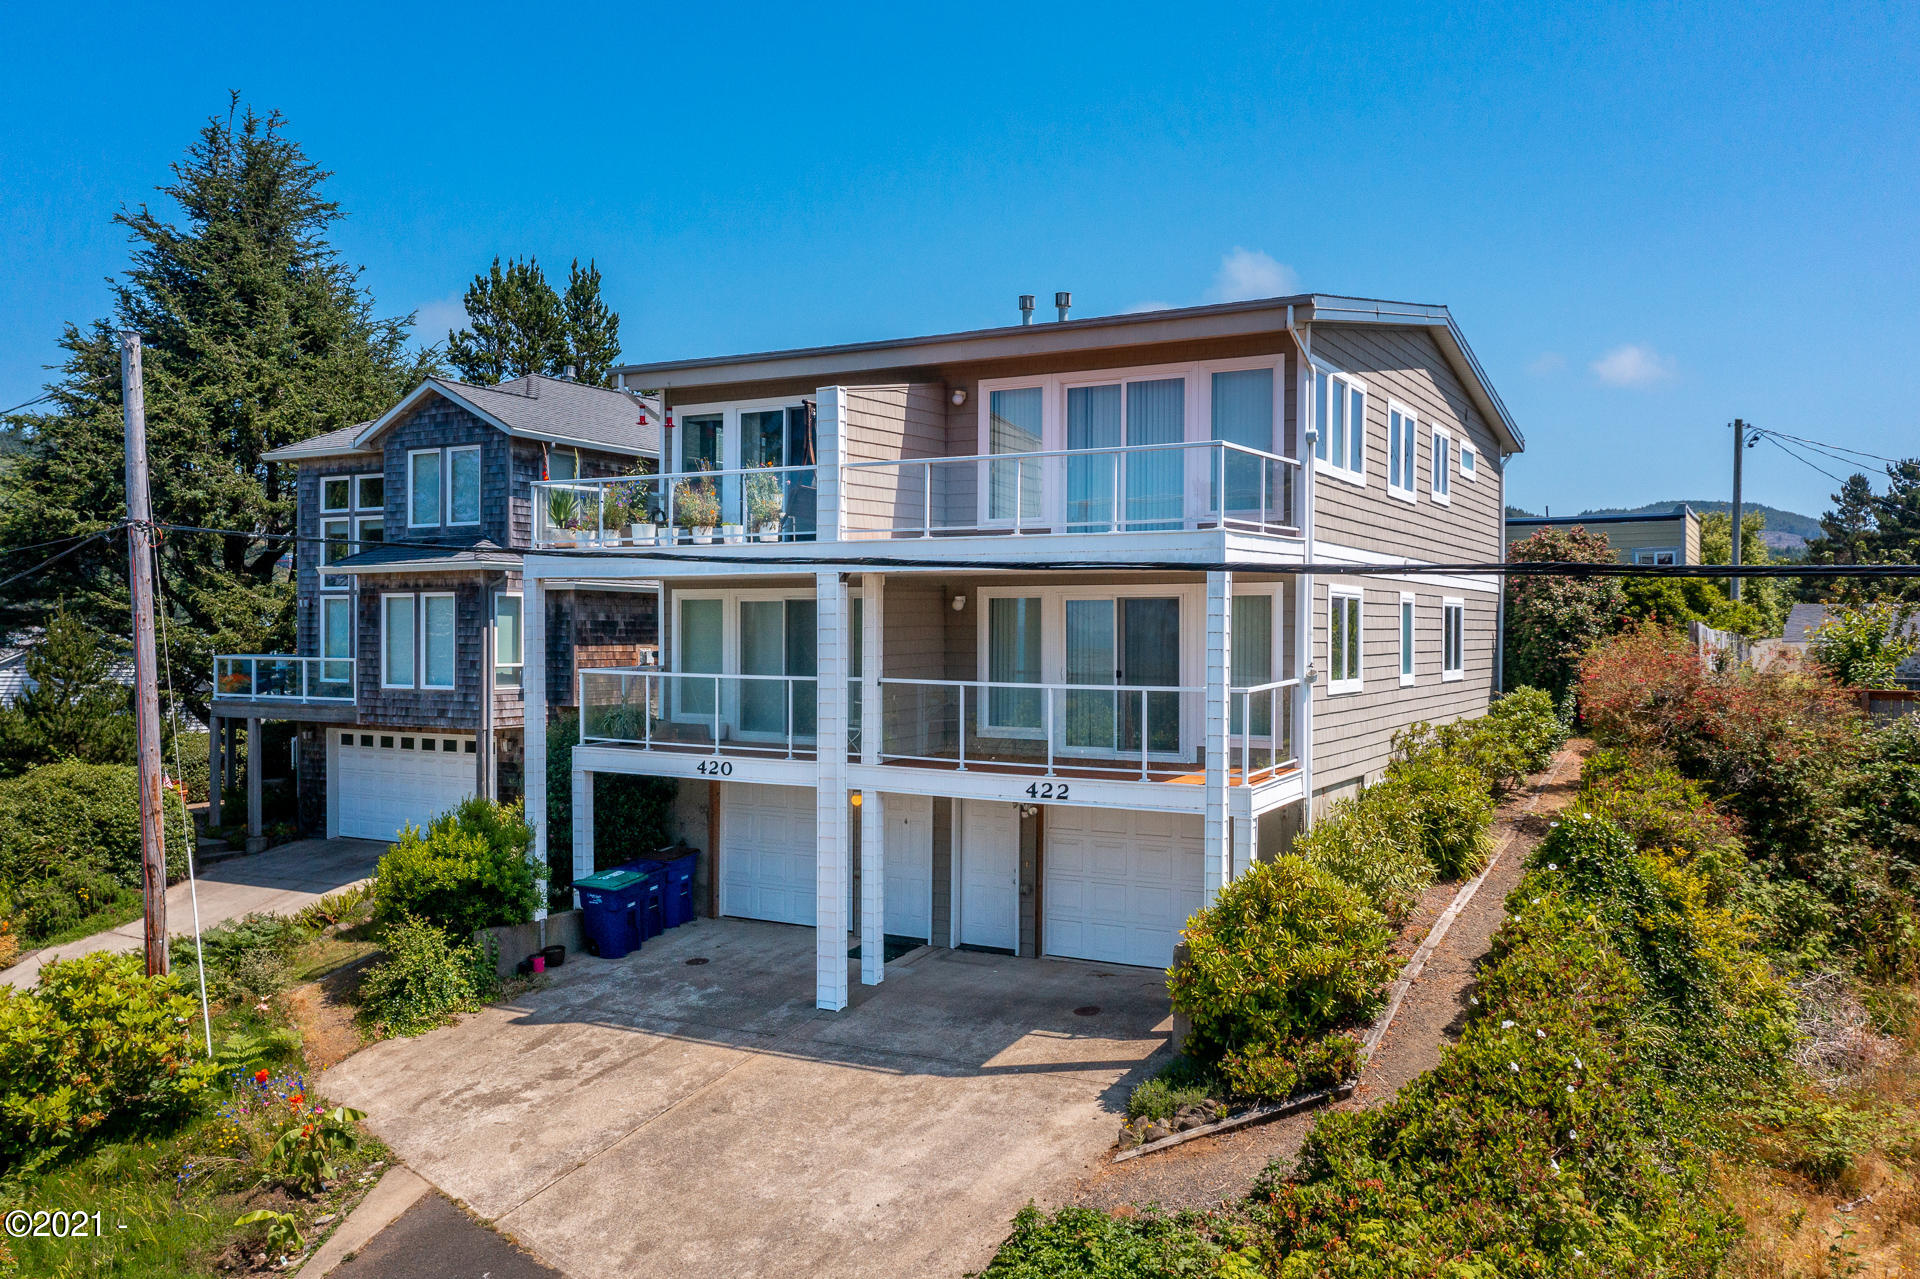 422 SW Coast Ave Depoe Bay, Gleneden Beach, Lincoln City, Newport, Otis, Rose Lodge, Seal Rock, Waldport, Yachats, To Home Listings - Amy Plechaty, Emerald Coast Realty Real Estate, homes for sale, property for sale